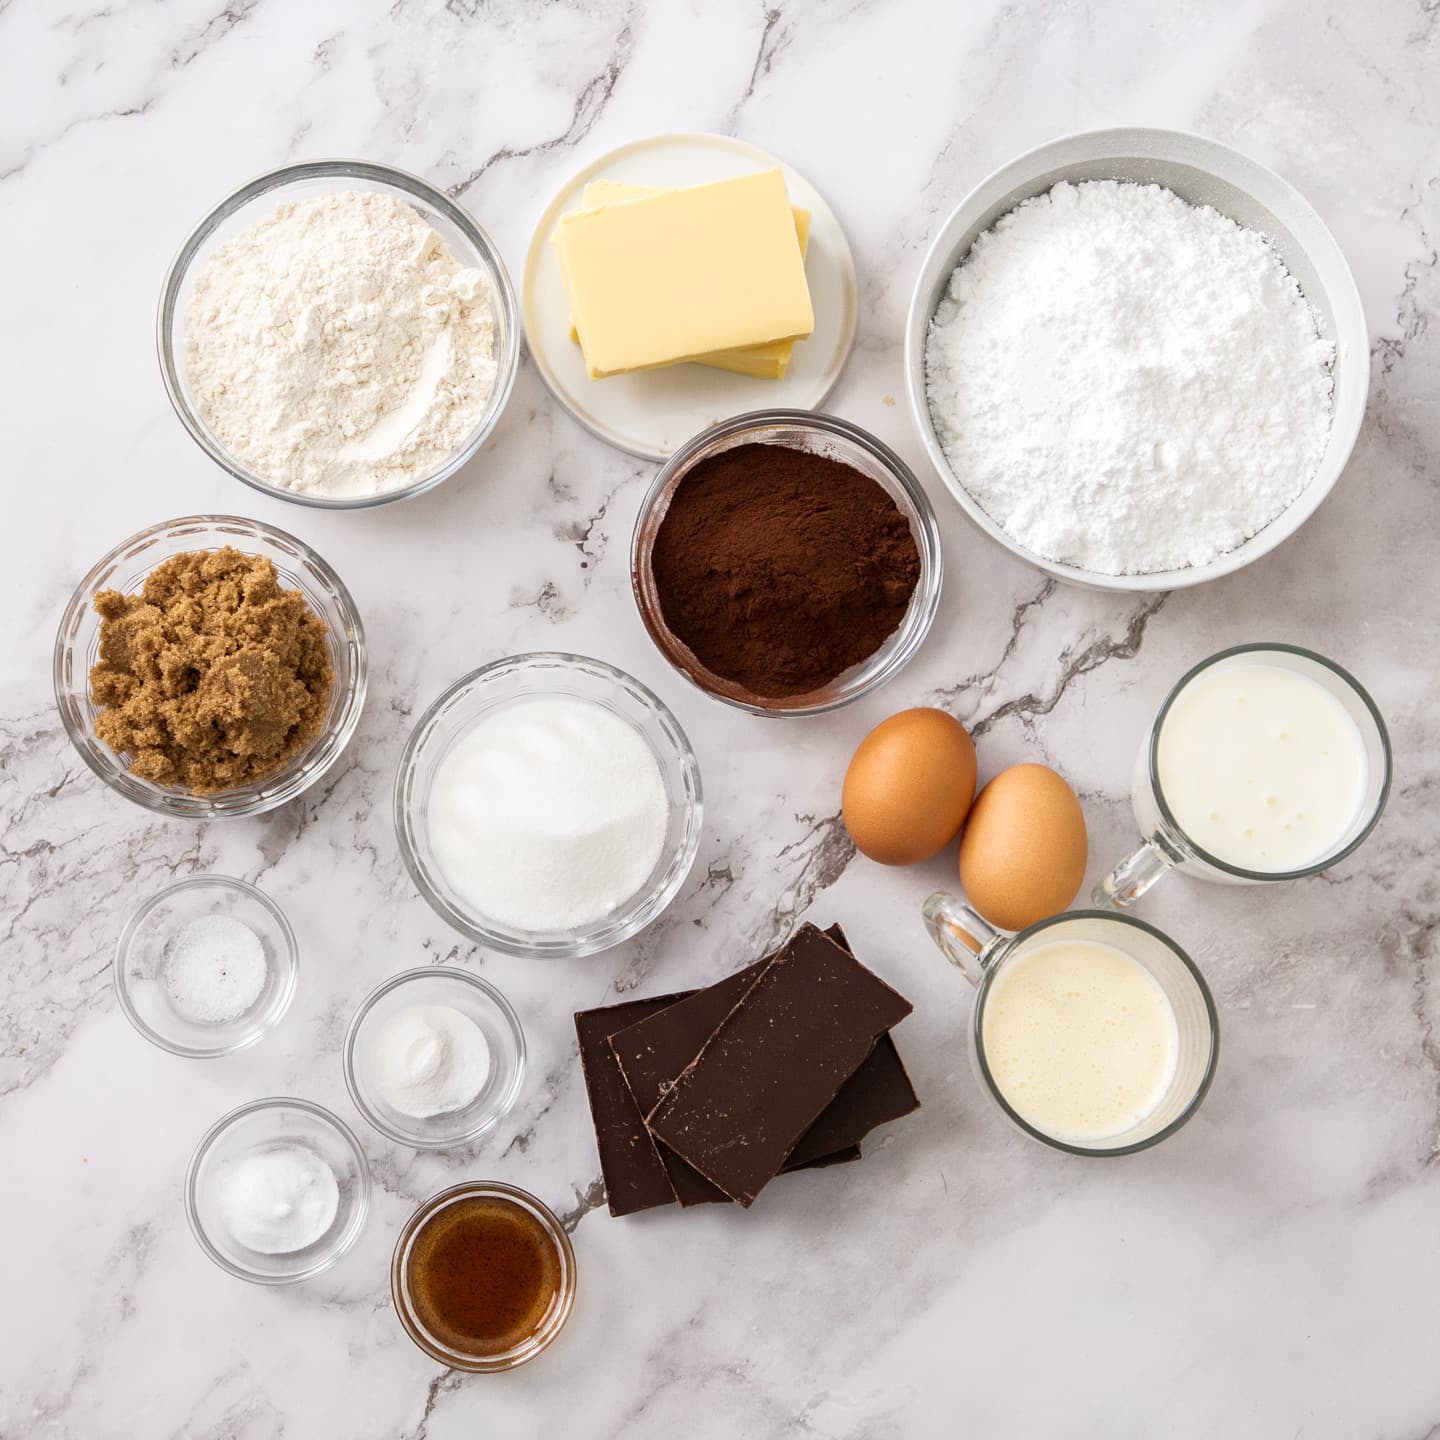 Ingredients for chocolate fudge cupcakes on a marble surface.